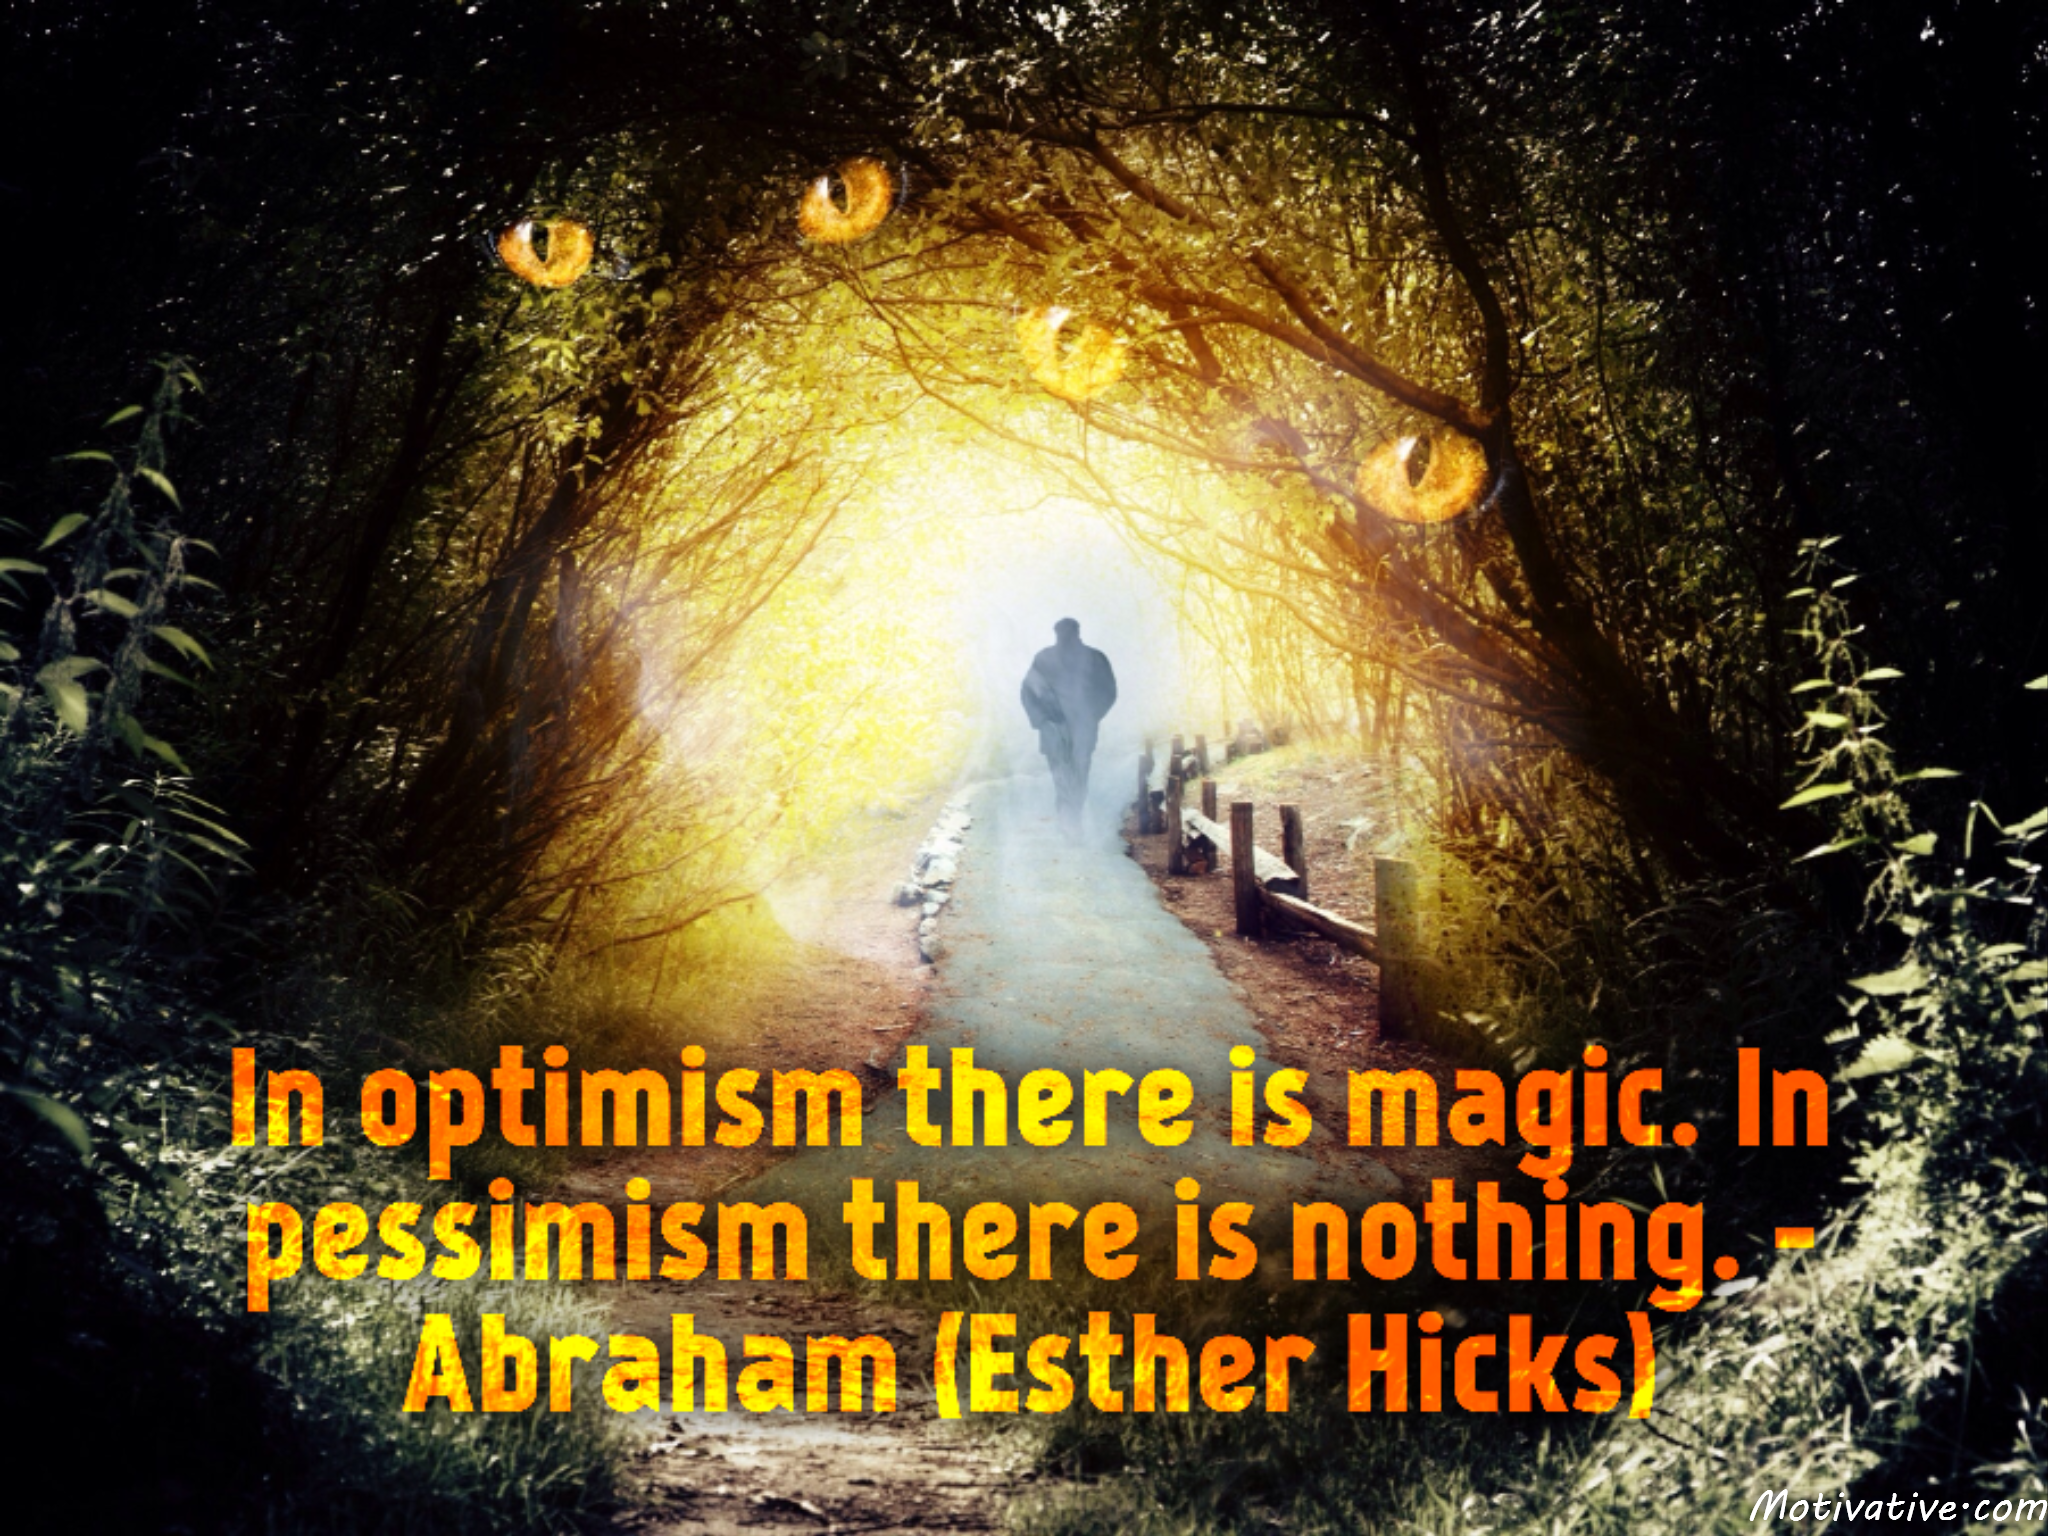 In optimism there is magic. In pessimism there is nothing. – Abraham (Esther Hicks)